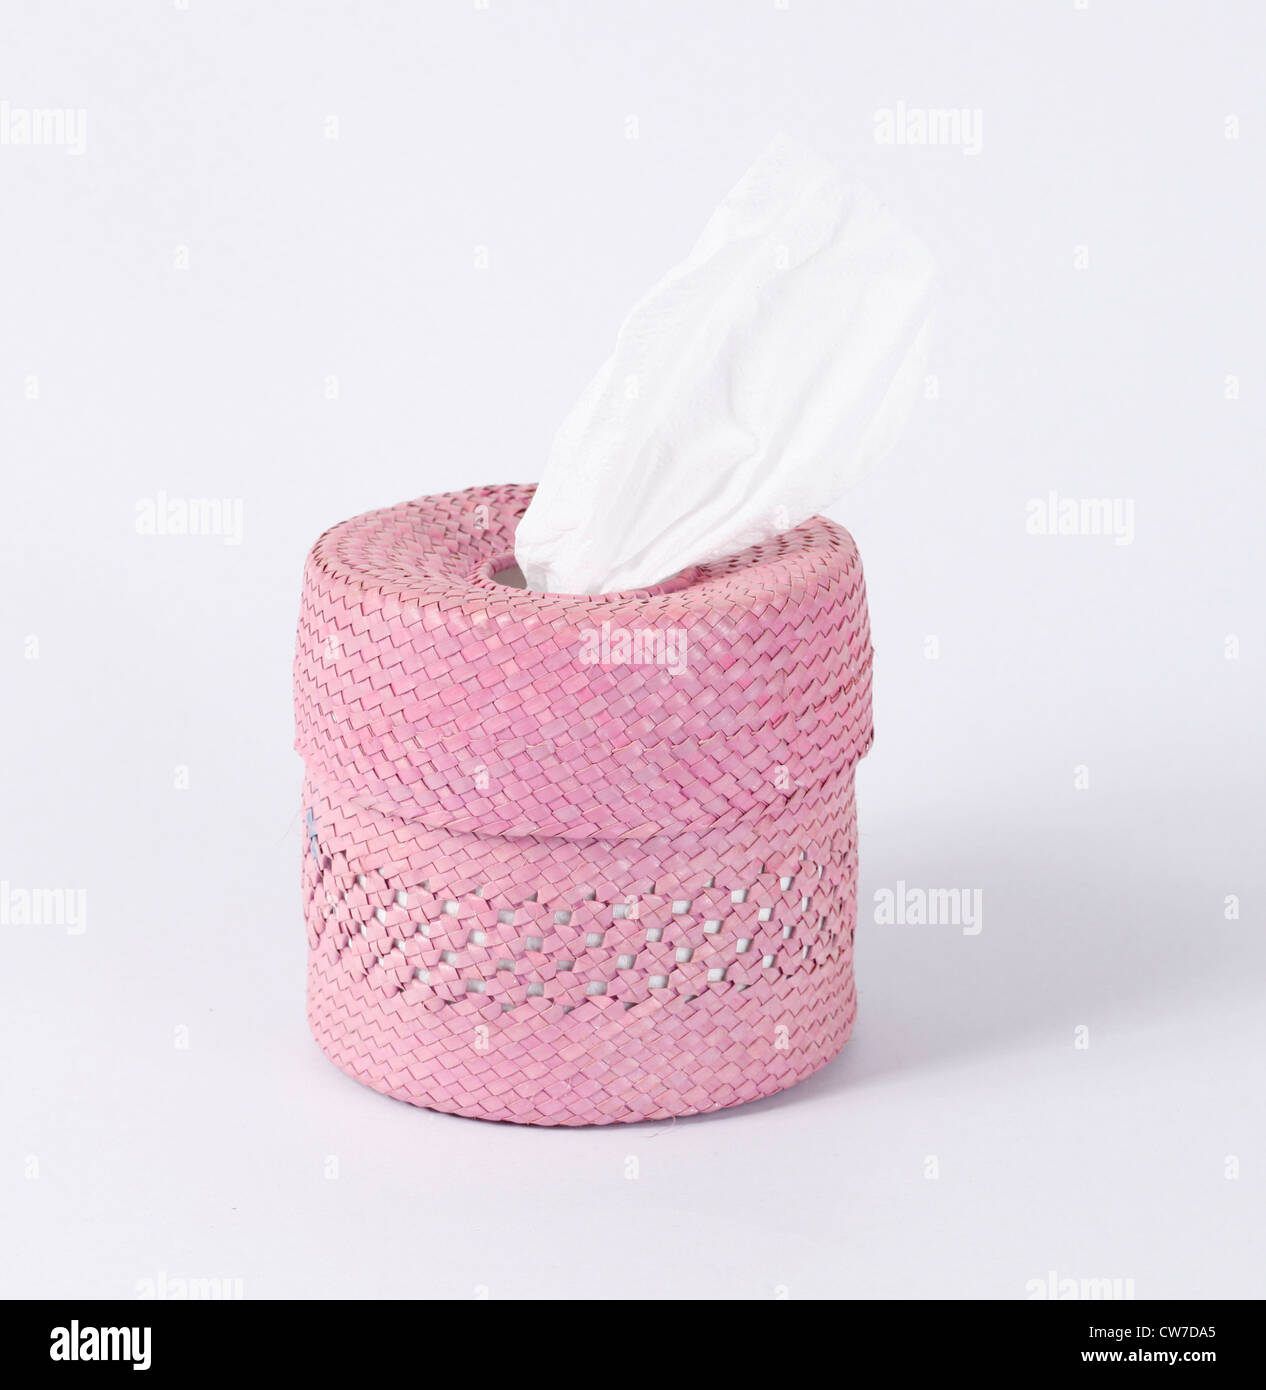 pink Box of Tissues on White Background Stock Photo